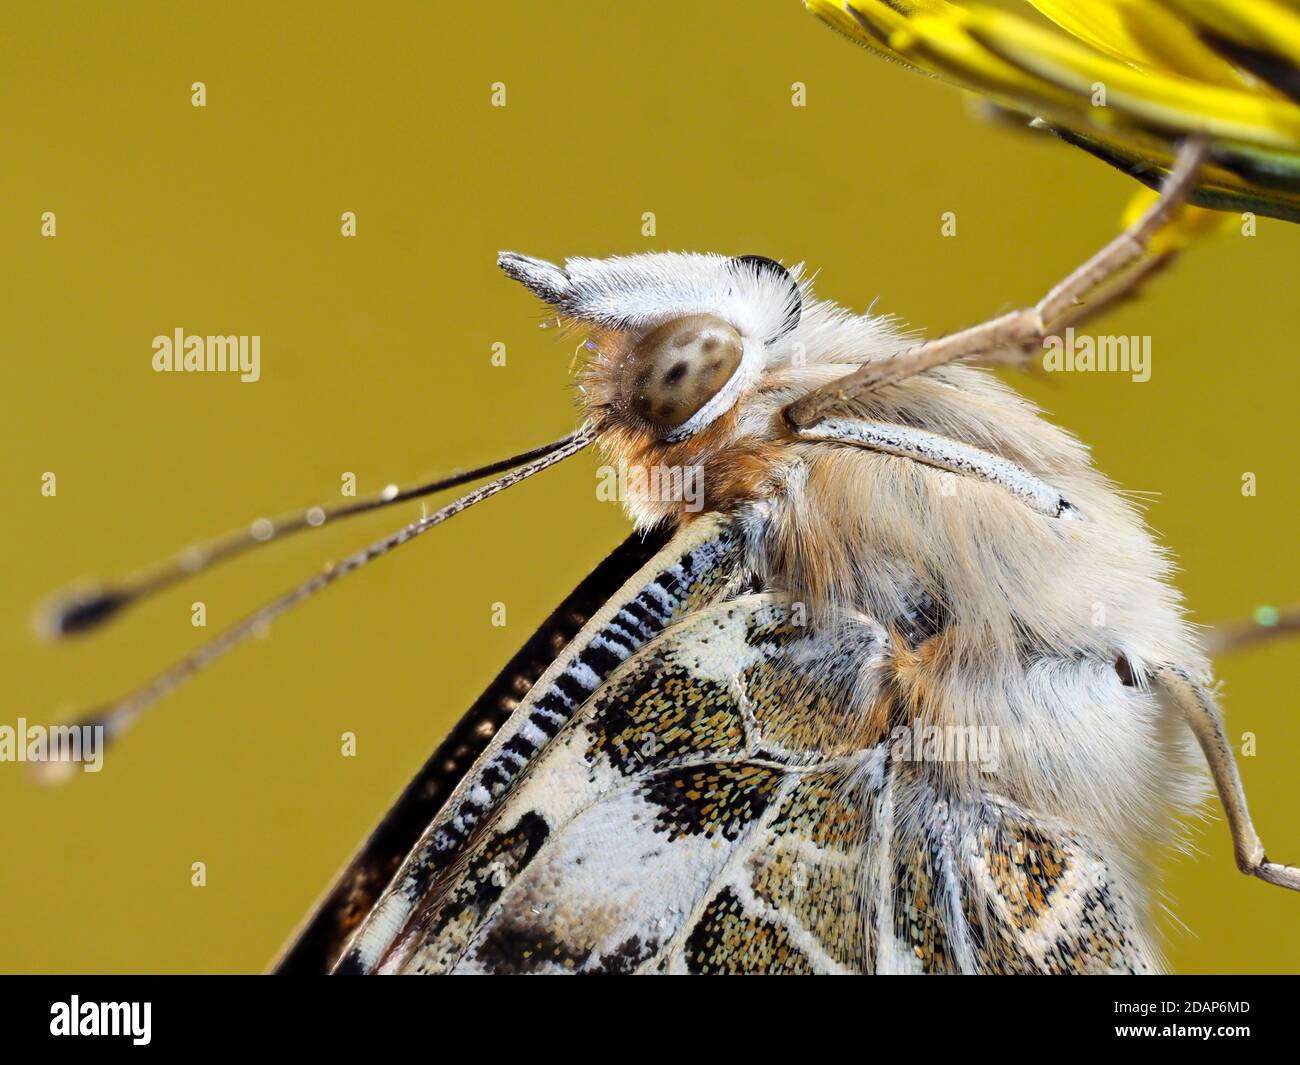 Painted Lady Butterfly, (Vanessa cardui), Kent UK, close up showing eyes and antennae, resting on dandelion flower, garden, Stacked Focus Image Stock Photo